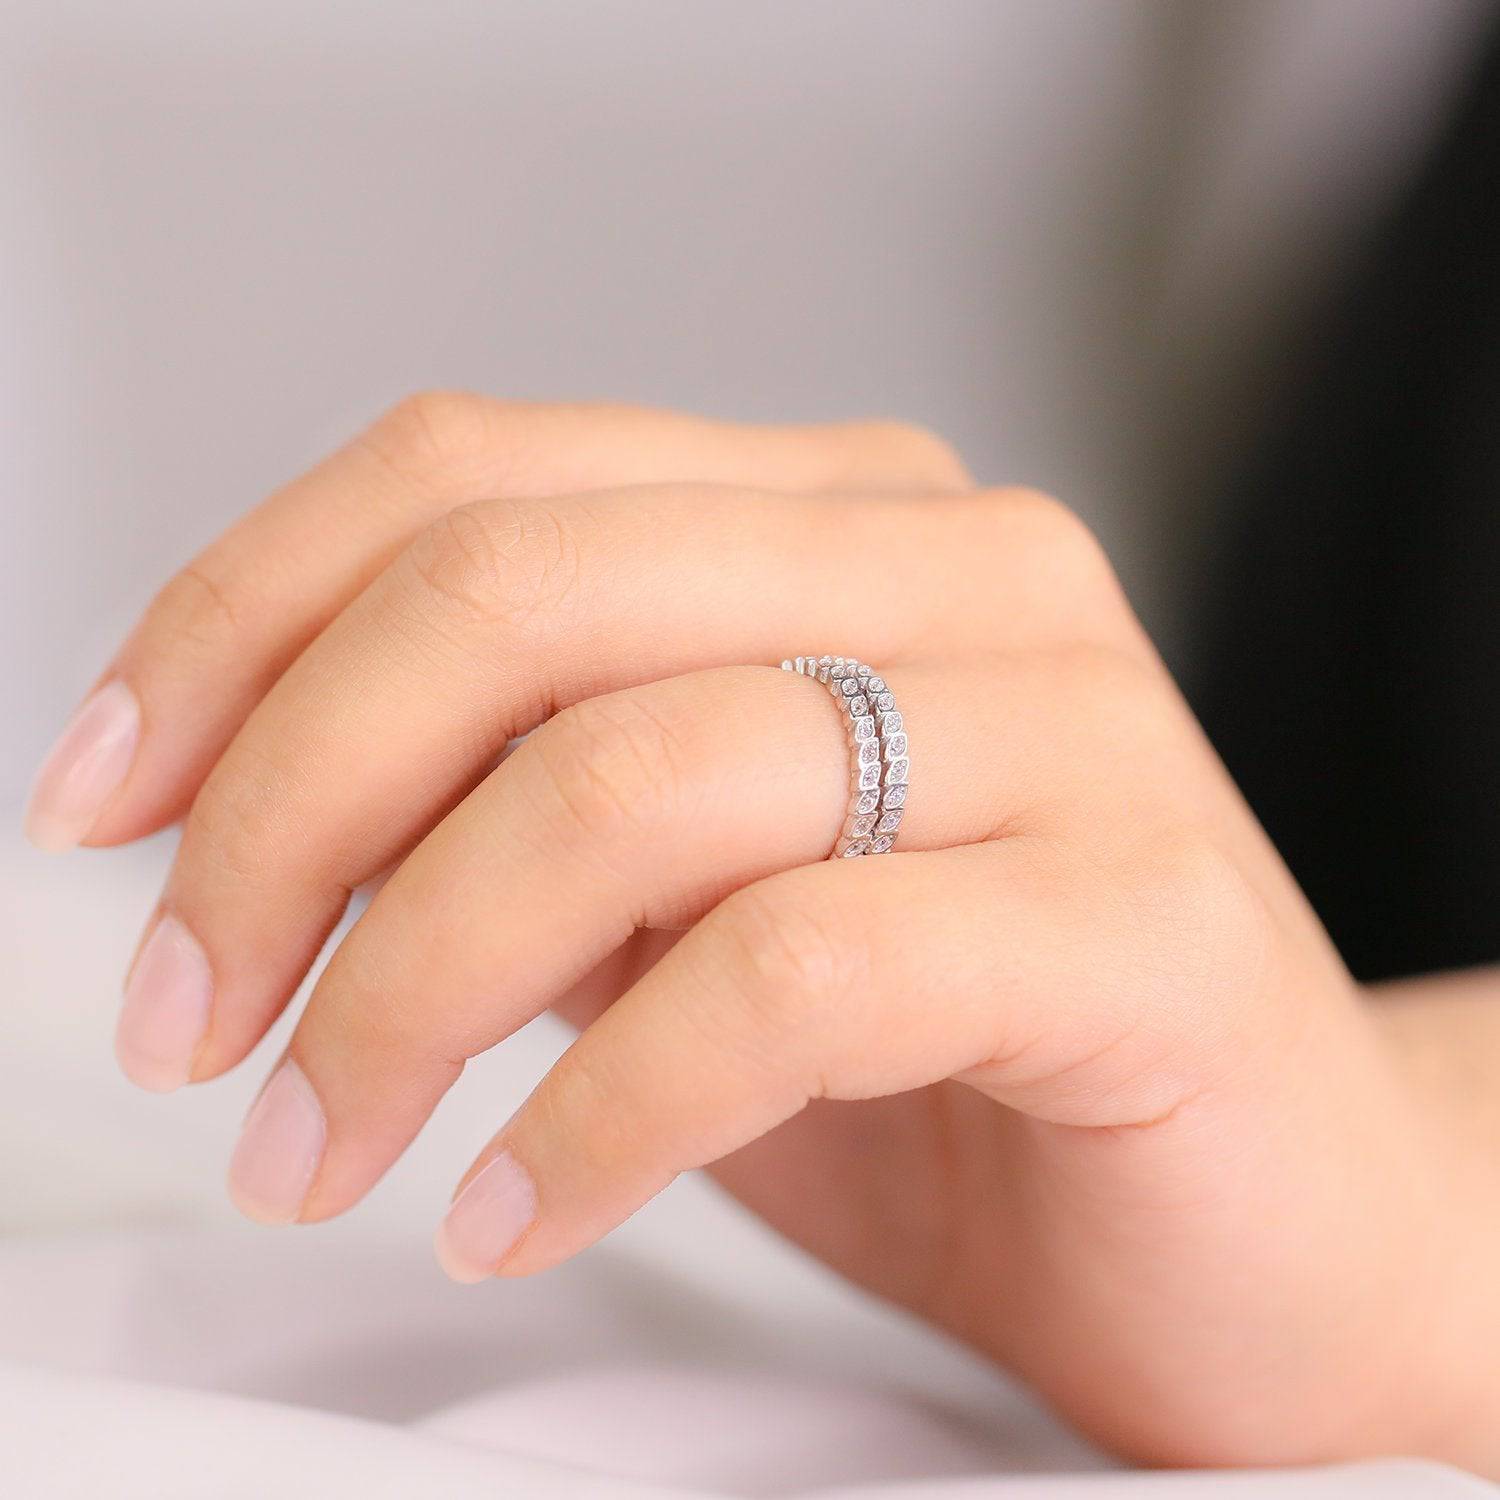 PAIR OF DAINTY ETERNITY BANDS - Trove & Co.